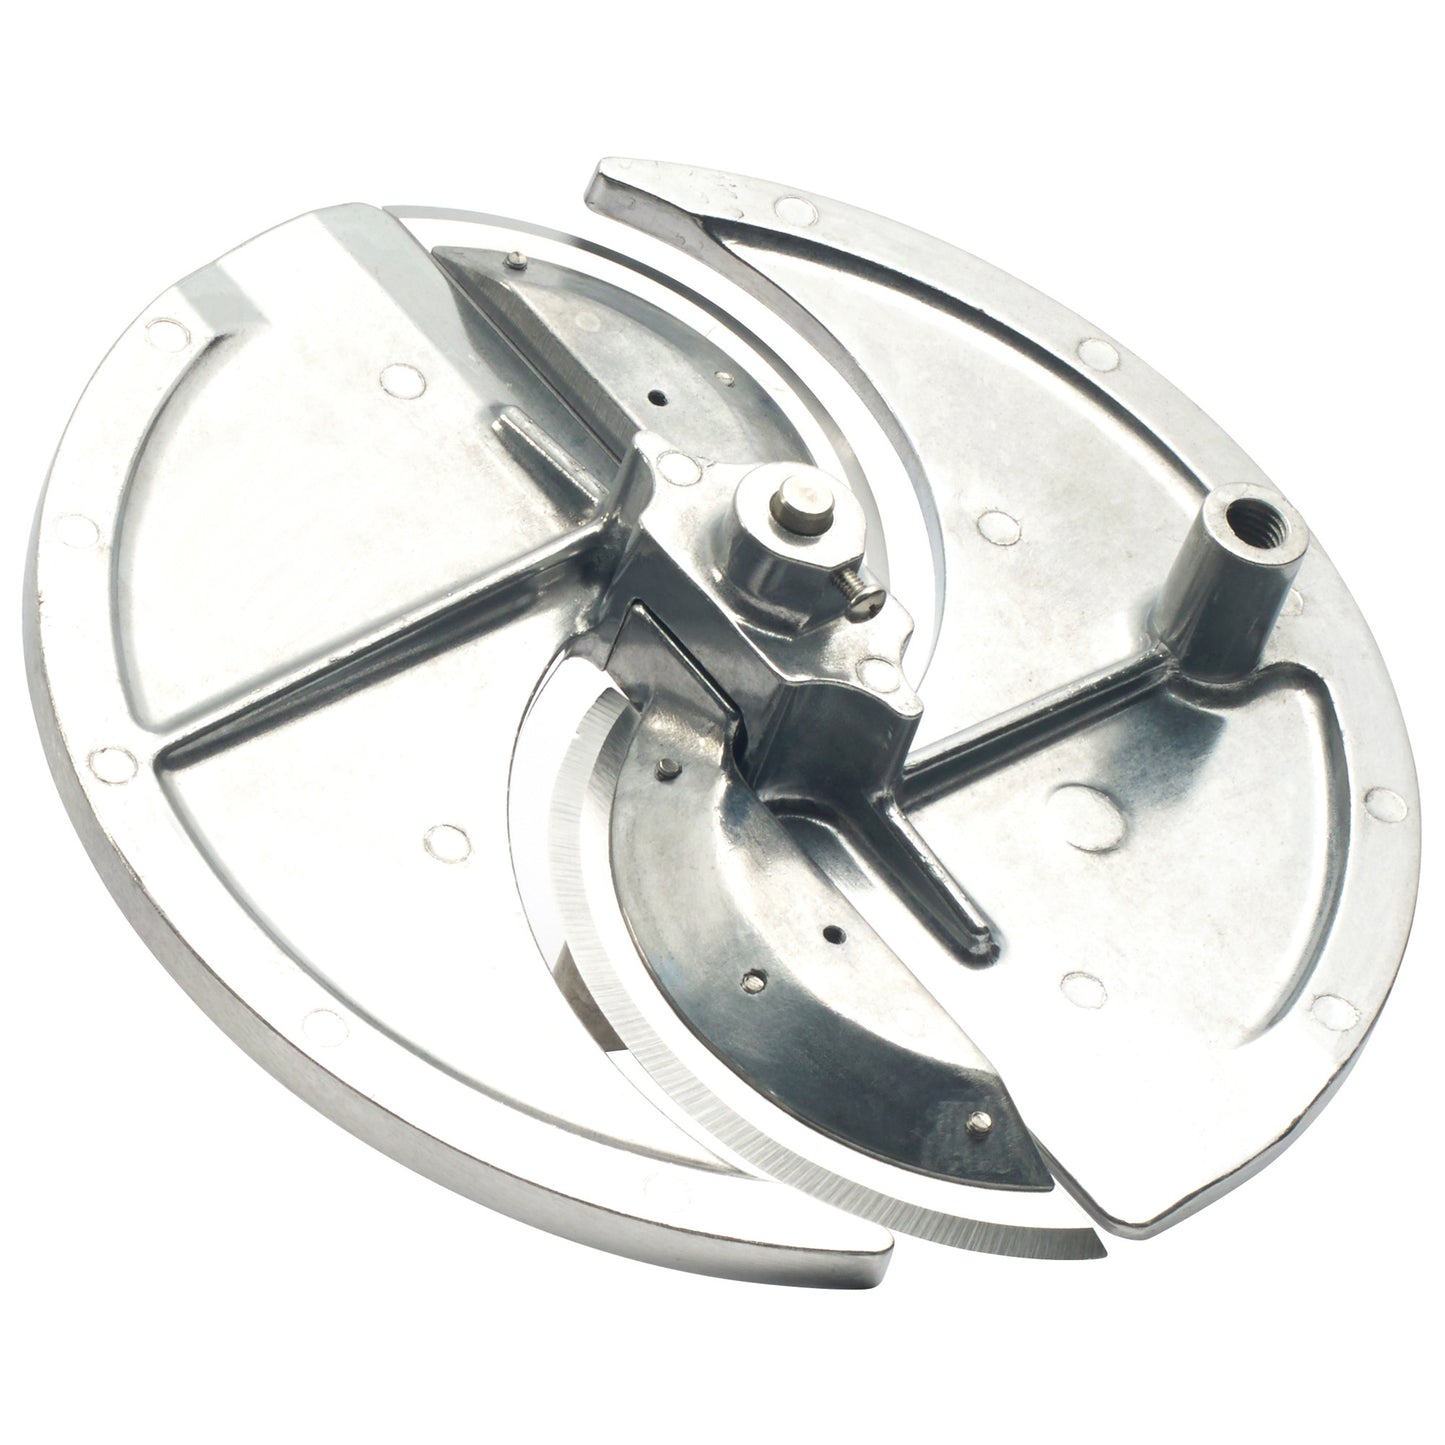 FVS-1SB - Replacement Shaft Blade Turntable Assembly for FVS-1